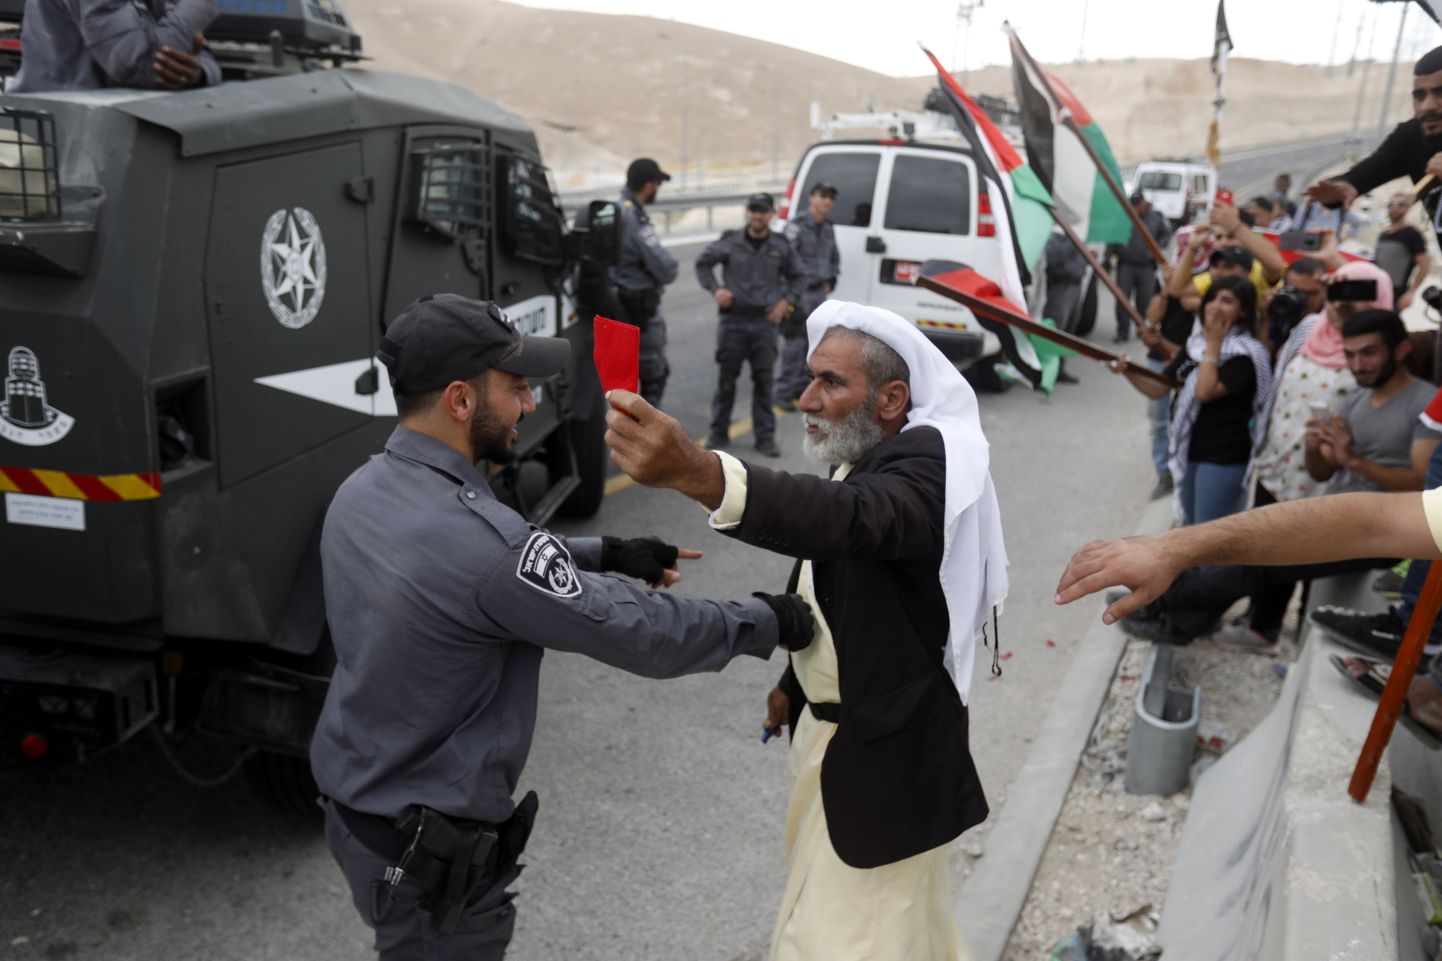 Demonstrators scuffle with Israeli troops as others wave Palestinian flags during a protest against Israel's plan to demolish the Palestinian Bedouin village of Khan al-Ahmar, located between the West Bank city of Jericho and Jerusalem near the Israeli settlement of Maale Adumim